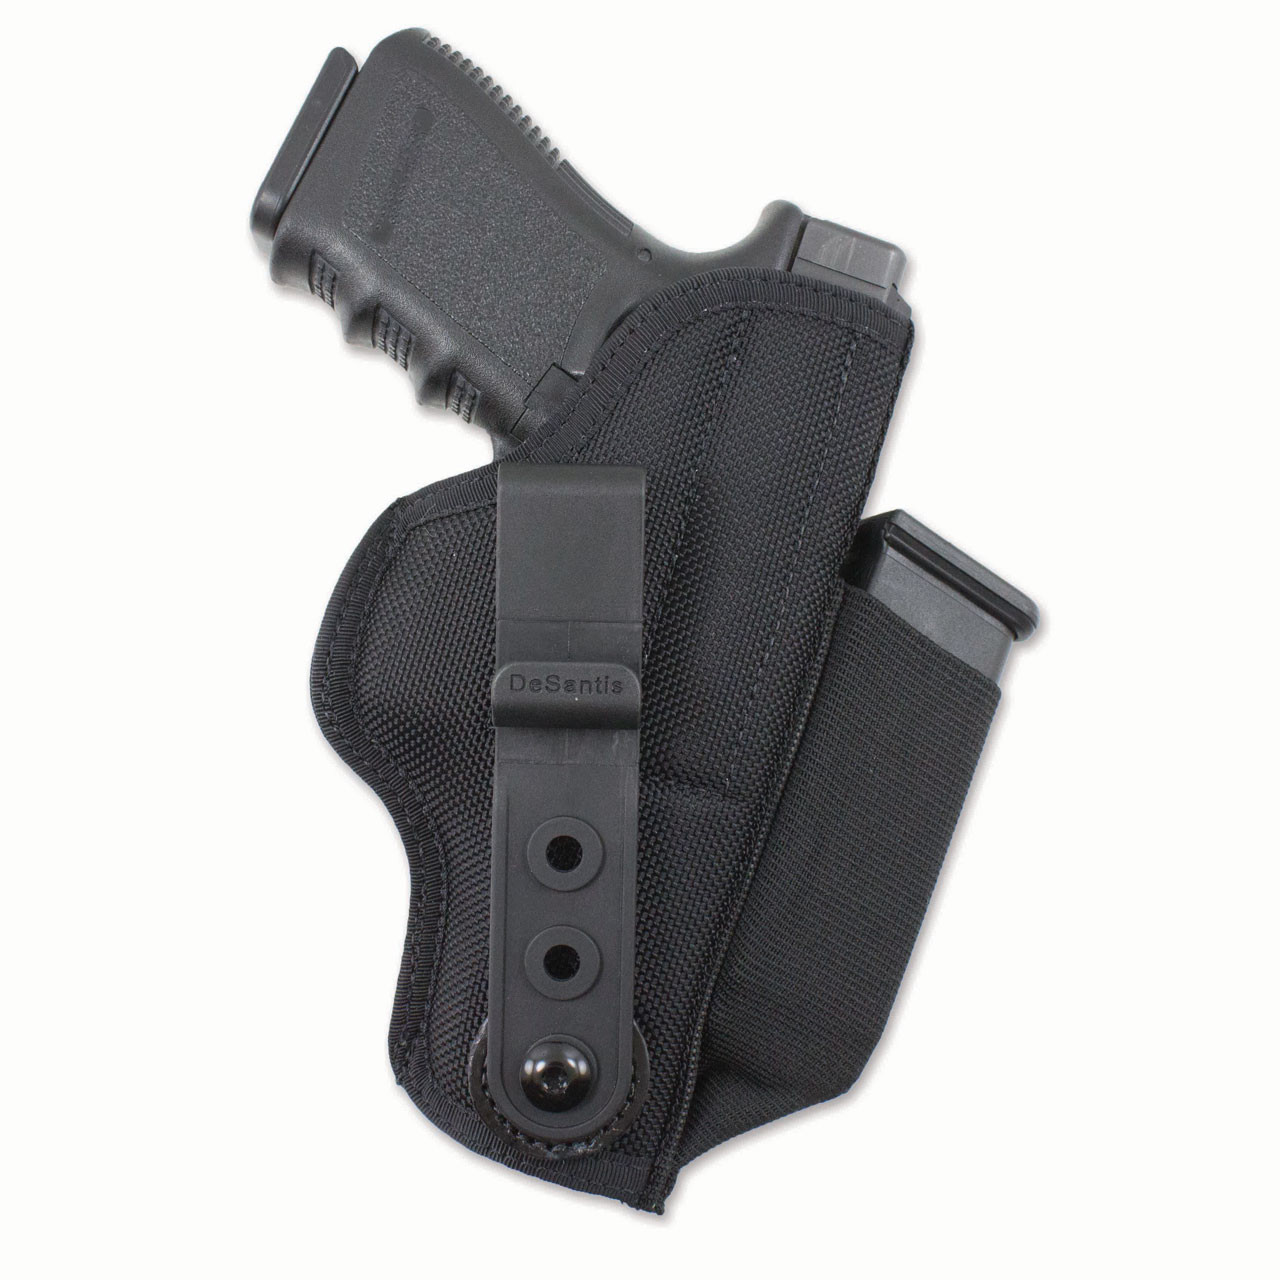 Details about   Walther PPQ 9mm 40 IWB Leather In The Waistband Concealed Carry Holster BLACK 